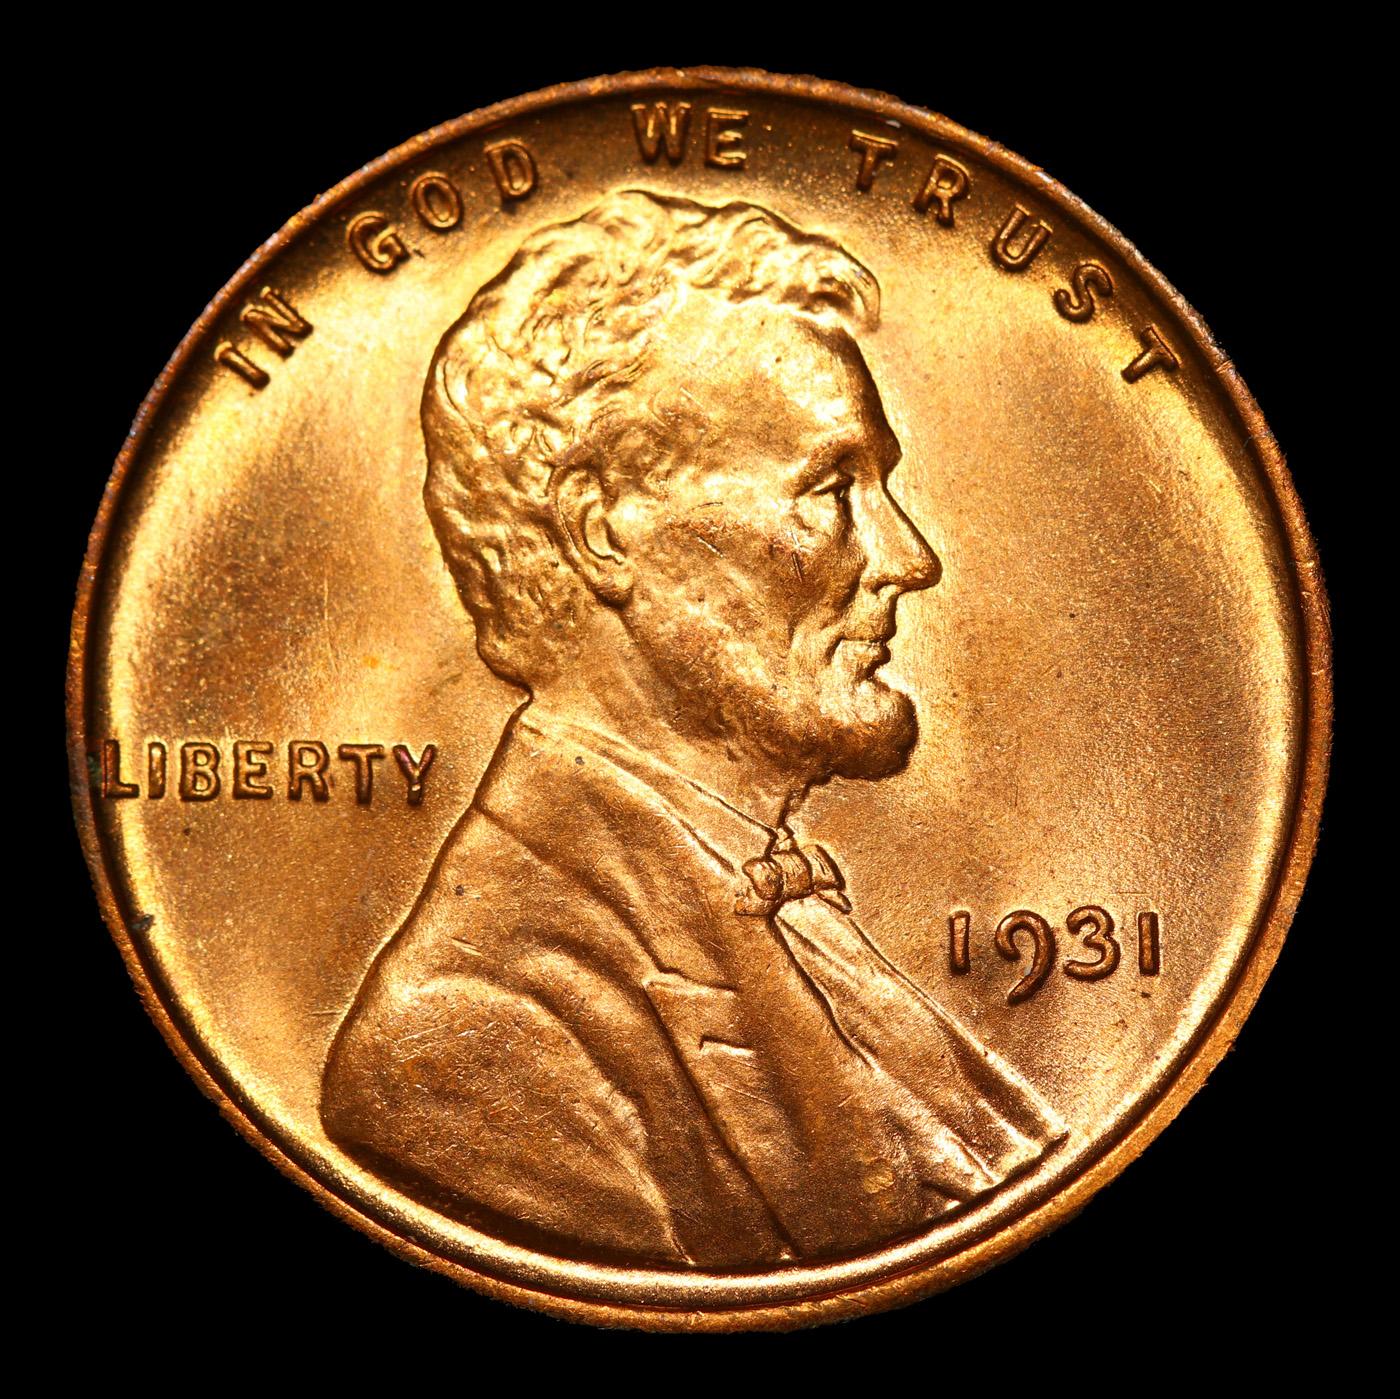 ***Auction Highlight*** 1931-p Lincoln Cent TOP POP! 1c Graded ms67+ rd By SEGS (fc)